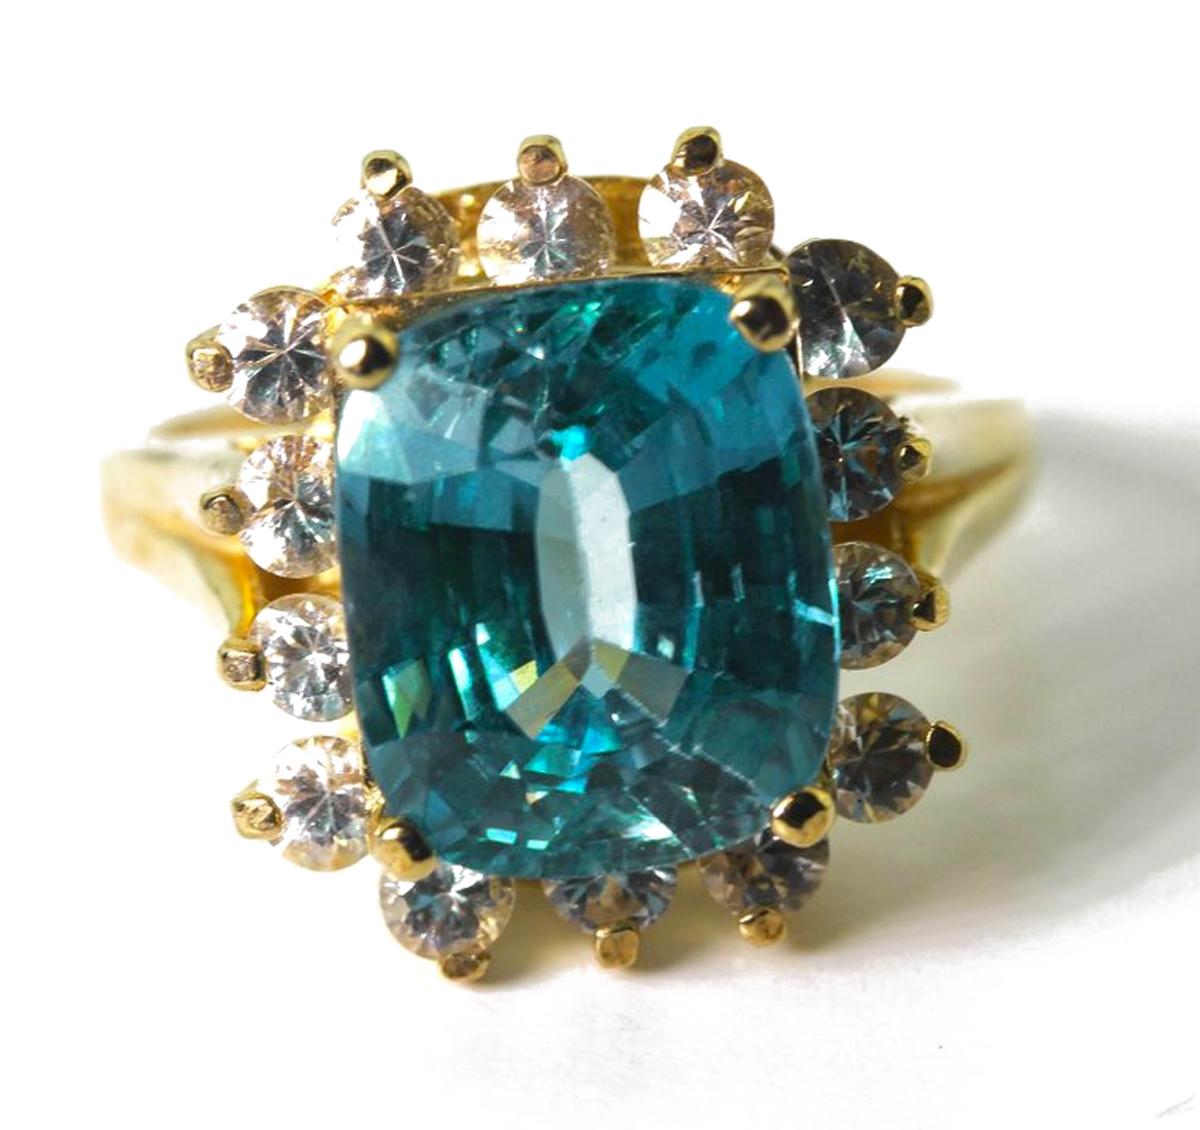 Amazing brilliant glittereing 7 carat blue Zircon adorned with a surround of brilliant white Sapphires set in a unique handmade 14Kt yellow gold ring size 7 (sizable)  